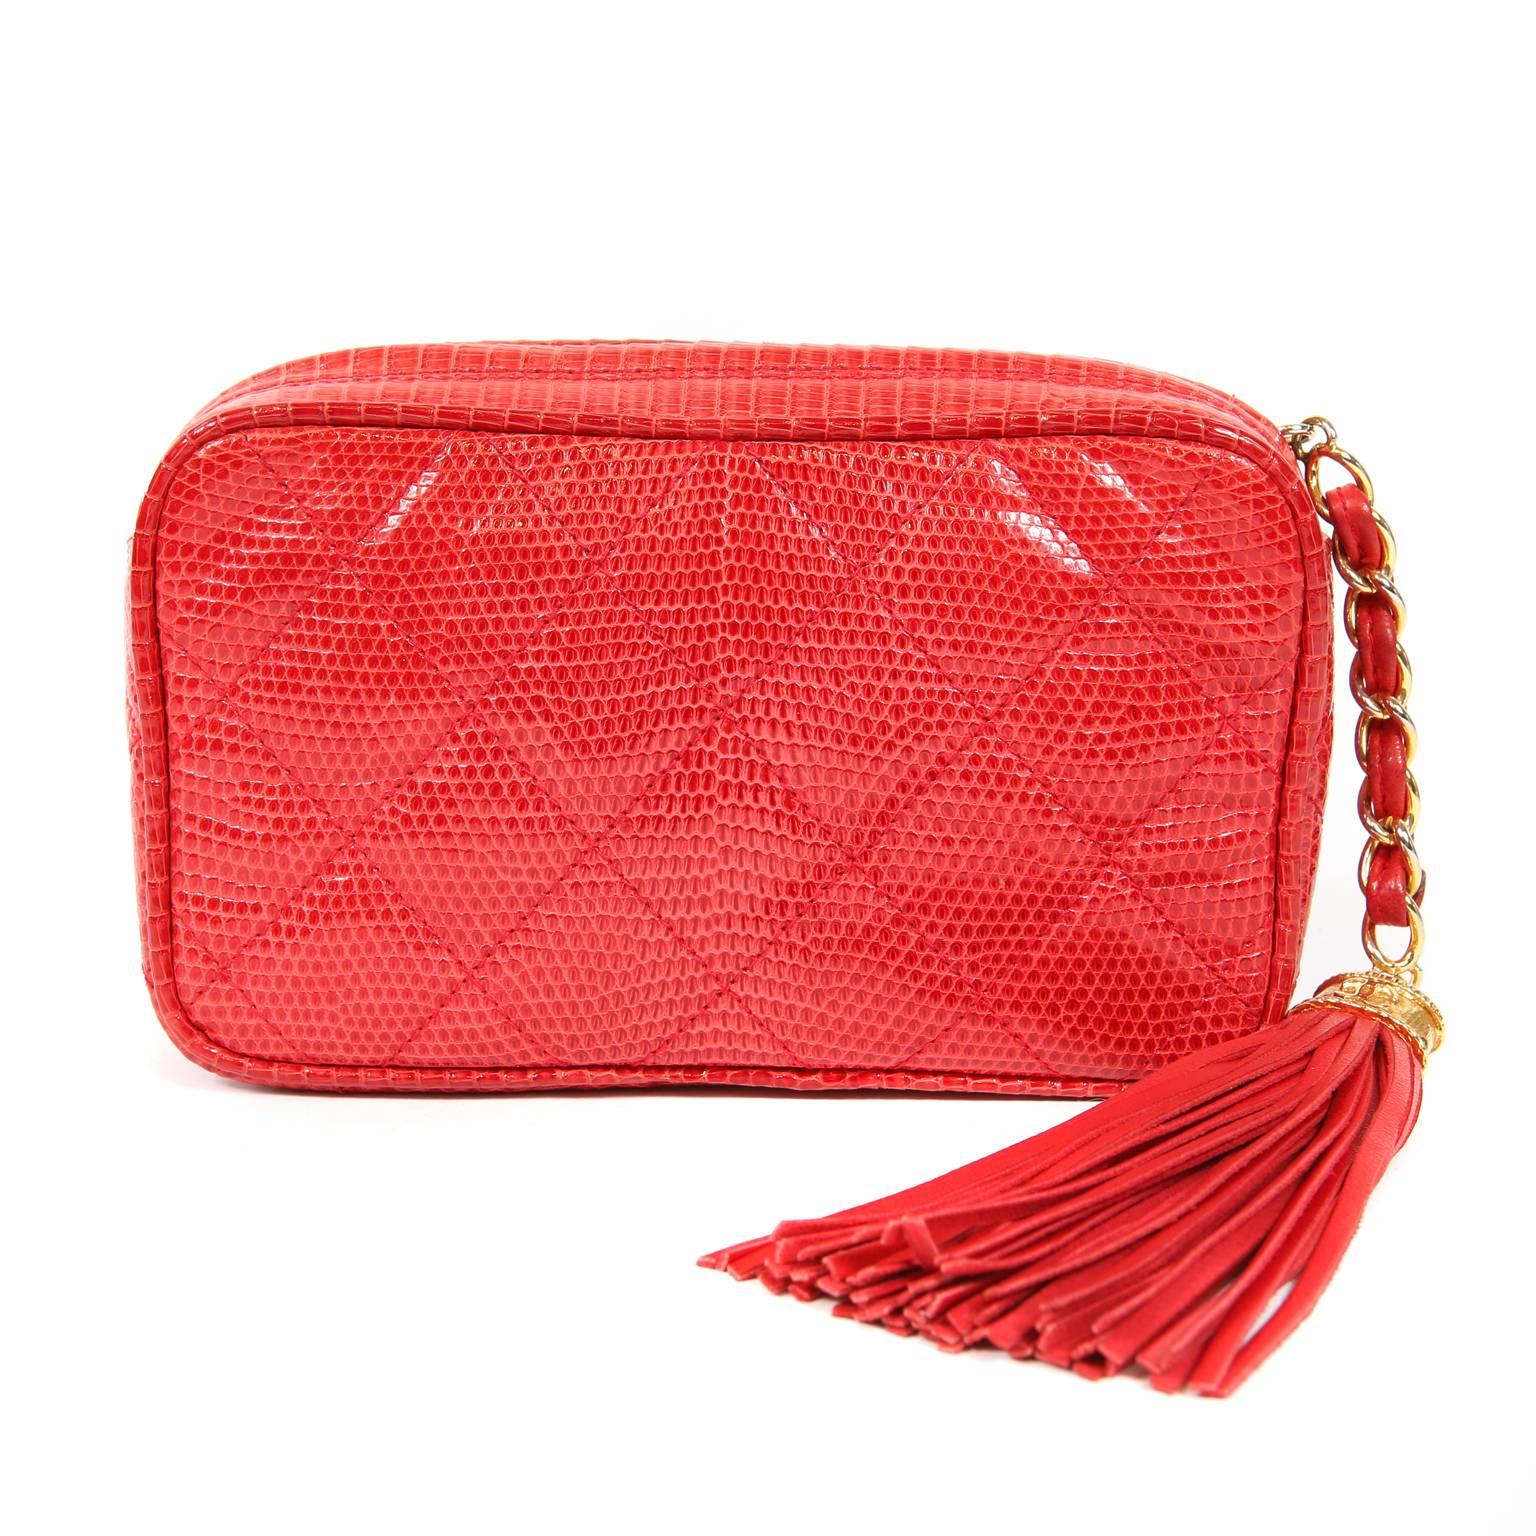 Chanel Braise Red Lizard Clutch- Excellent Condition
Collectible vintage piece from the early 1990’s in rare lizard skin.    
Bright red lizard skin is quilted in signature Chanel diamond pattern.  Zippered top has an oversized leather tassel pull